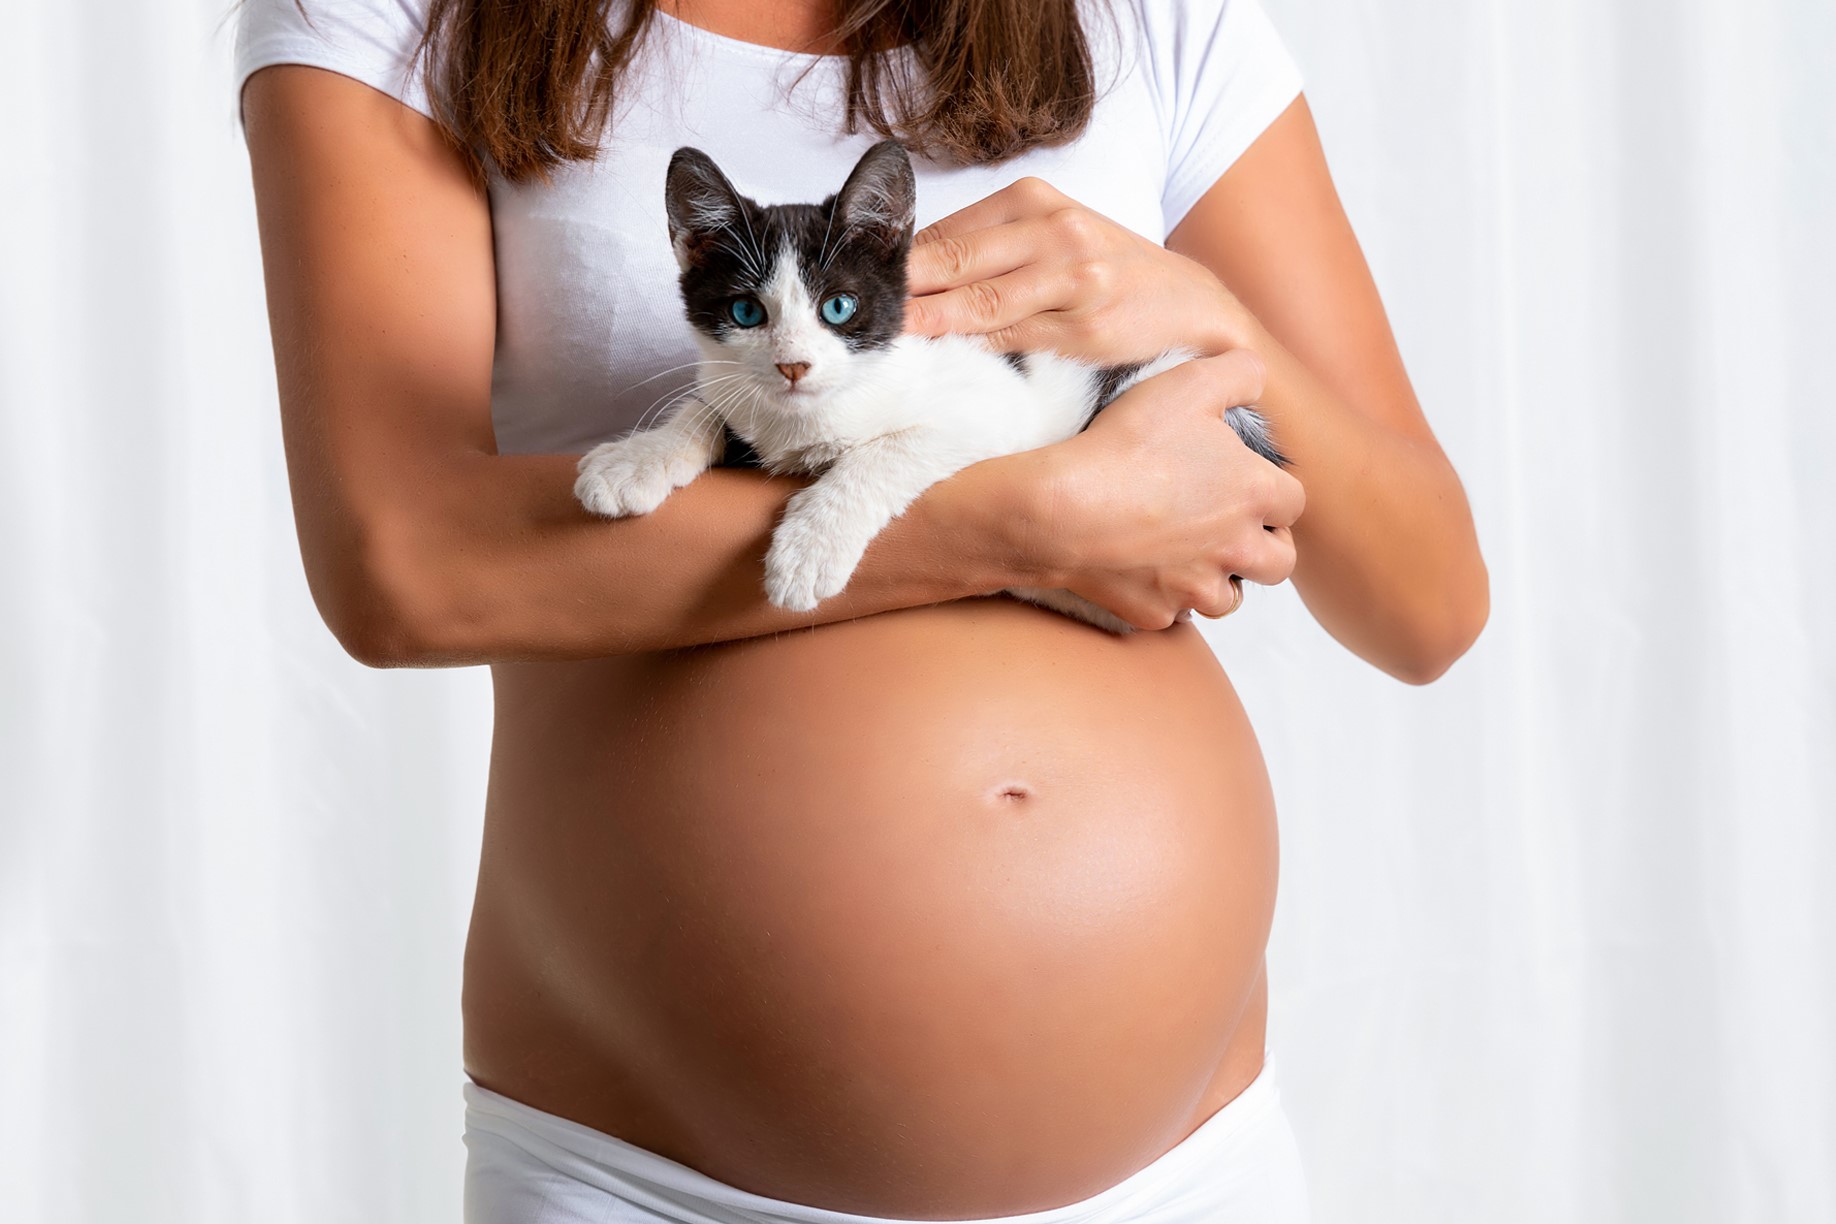 Pregnant? Here's The Safest Way To Clean A Litter Box!